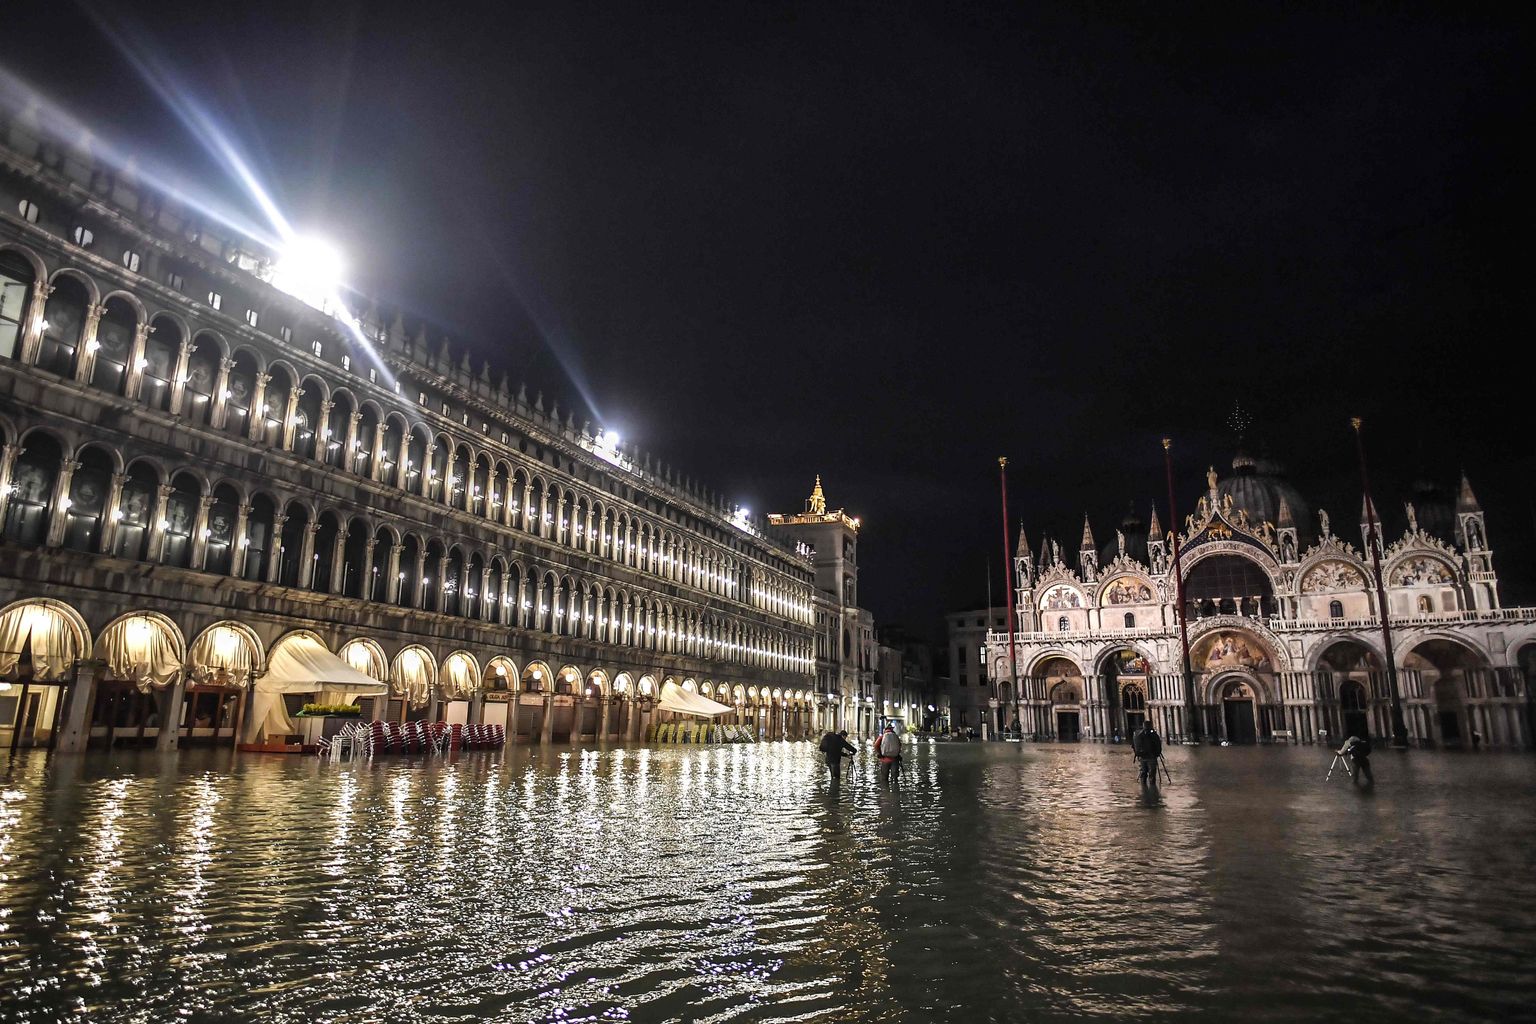 The flooded Piazza San Marco square, with the San Marco Basilica are pictured during an exceptional "Alta Acqua" high tide water level on November 12, 2019 in Venice. - Powerful rainstorms hit Italy on November 12, with the worst affected areas in the south and Venice, where there was widespread flooding. Within a cyclone that threatens the country, exceptional high water were rising in Venice, with the sirocco winds blowing northwards from the Adriatic sea against the lagoons outlets and preventing the water from flowing back into the sea. At 22:40pm the tide reached 183 cm, the second measure in history after the 198 cm of the 1966 flood. (Photo by Marco Bertorello / AFP)